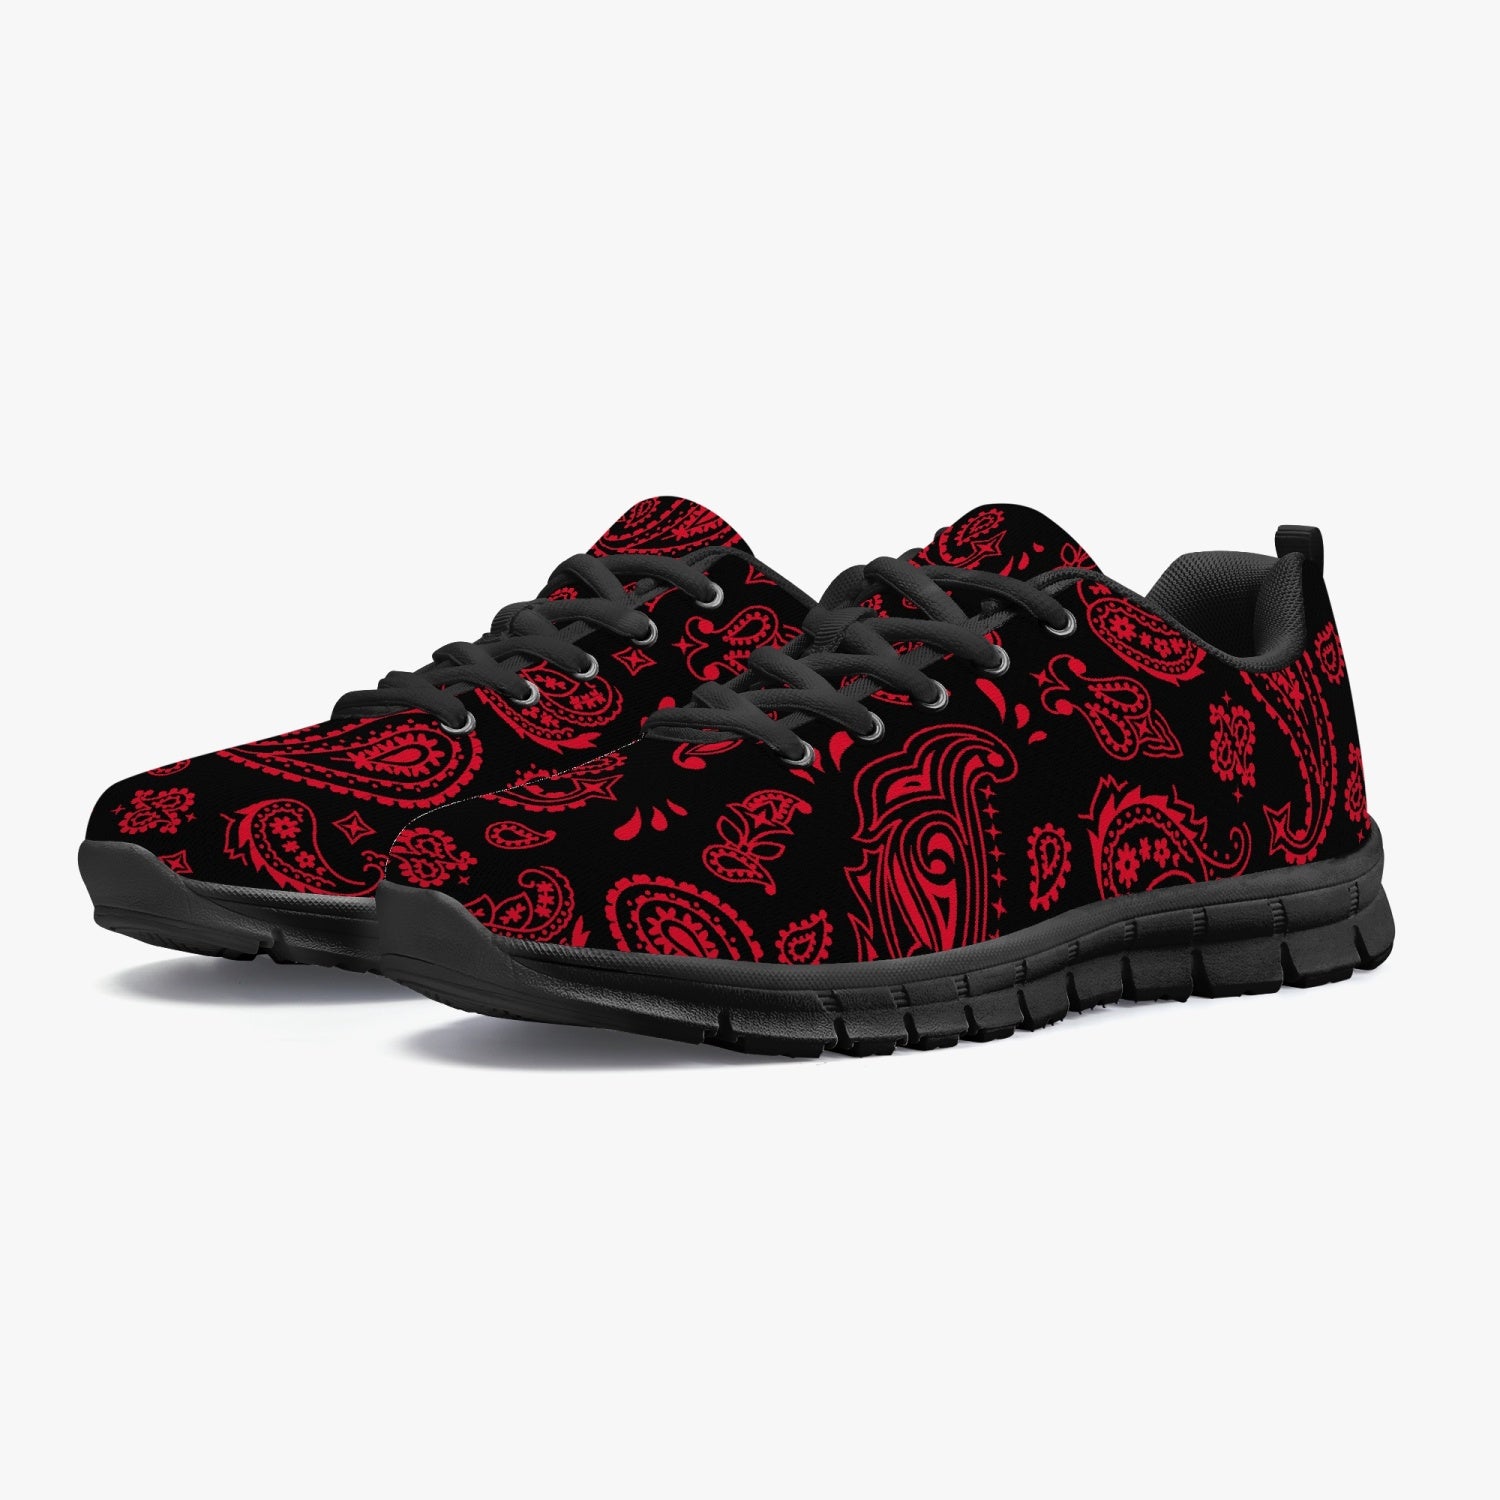 Women's Black Red Paisley Bandana Gym Workout Running Sneakers Overview